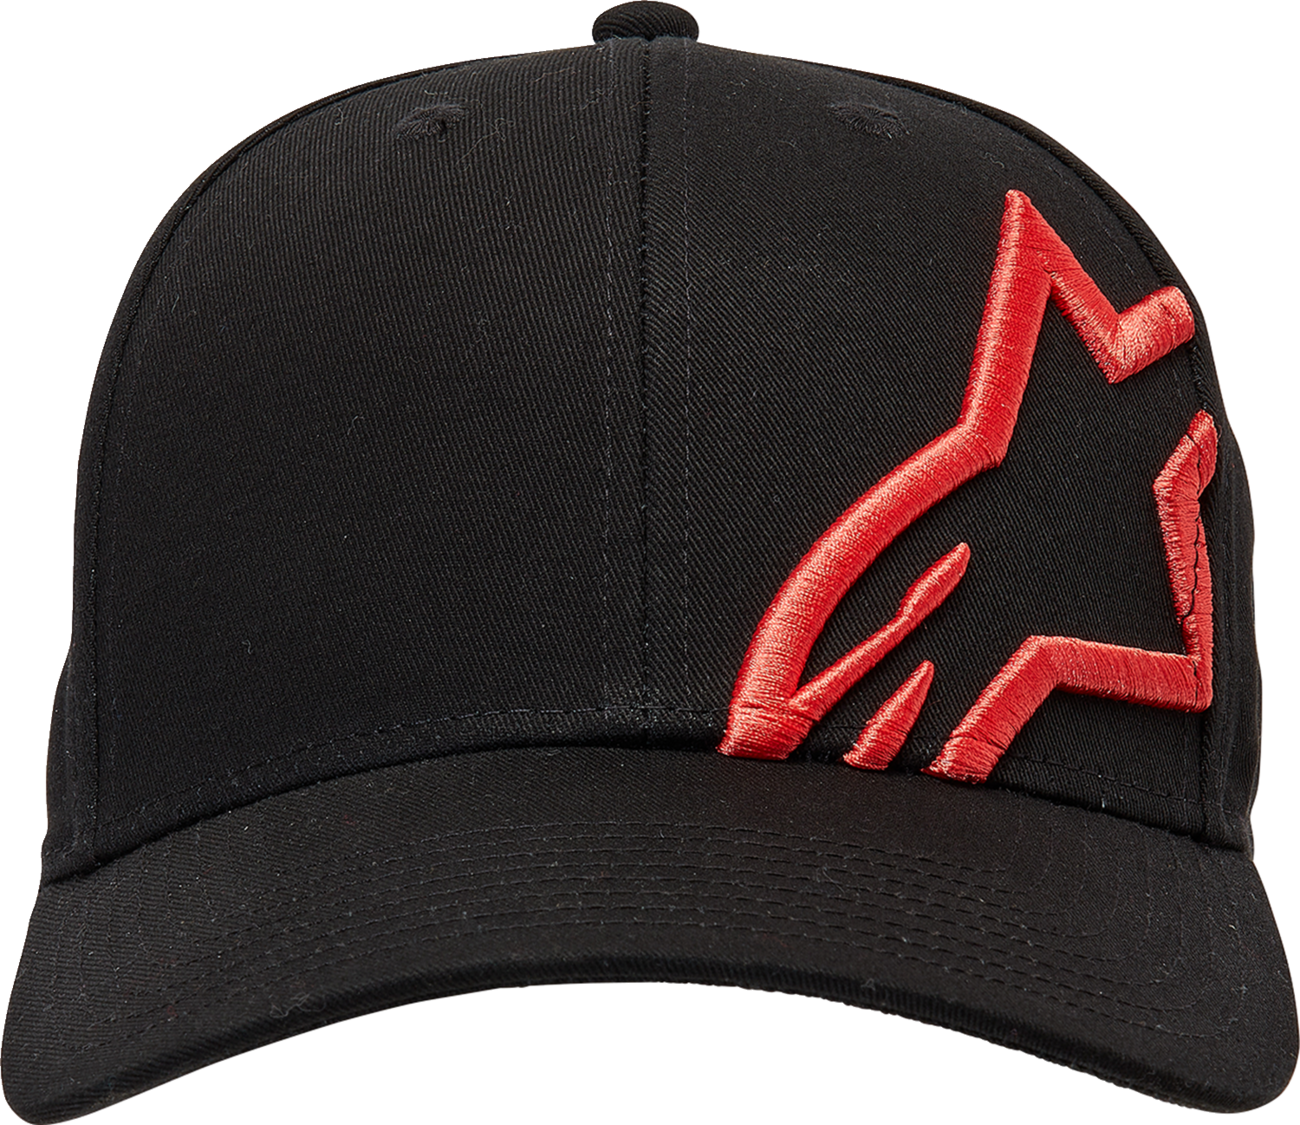 ALPINESTARS Corp Snap 2 Hat - Black/Warm Red - One Size 1211810091523OS